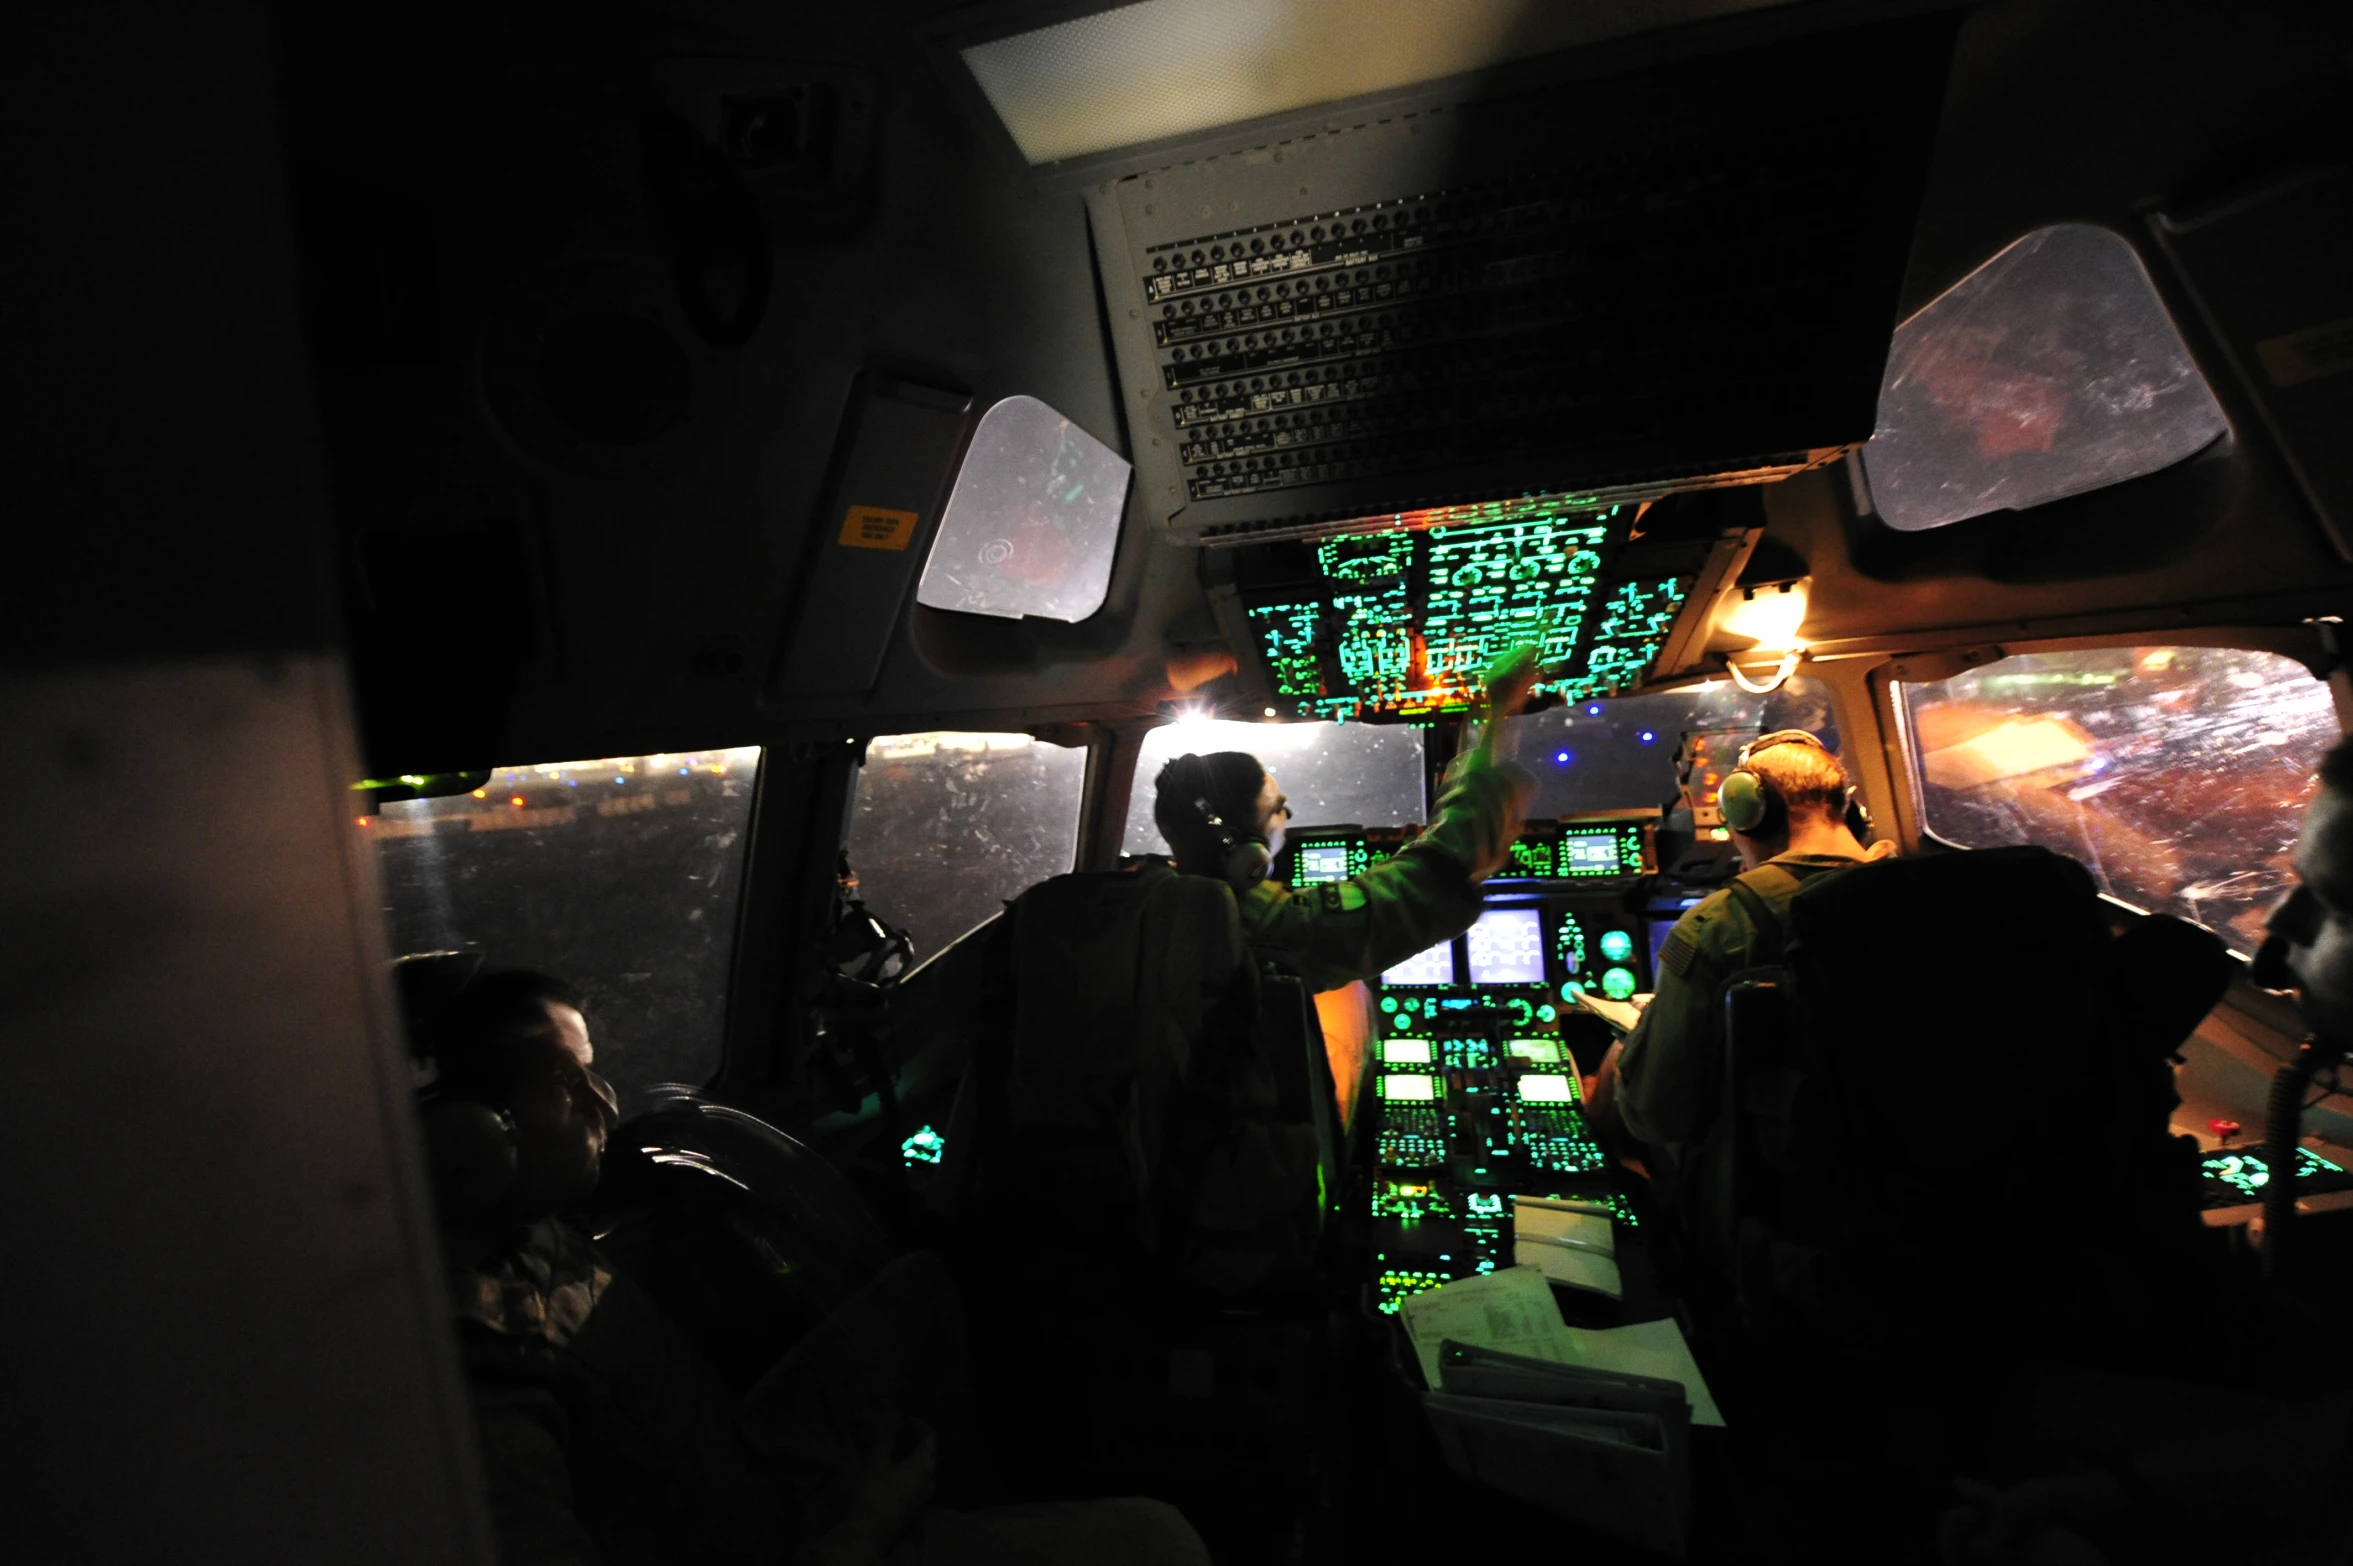 two pilots in the cockpit of a plane